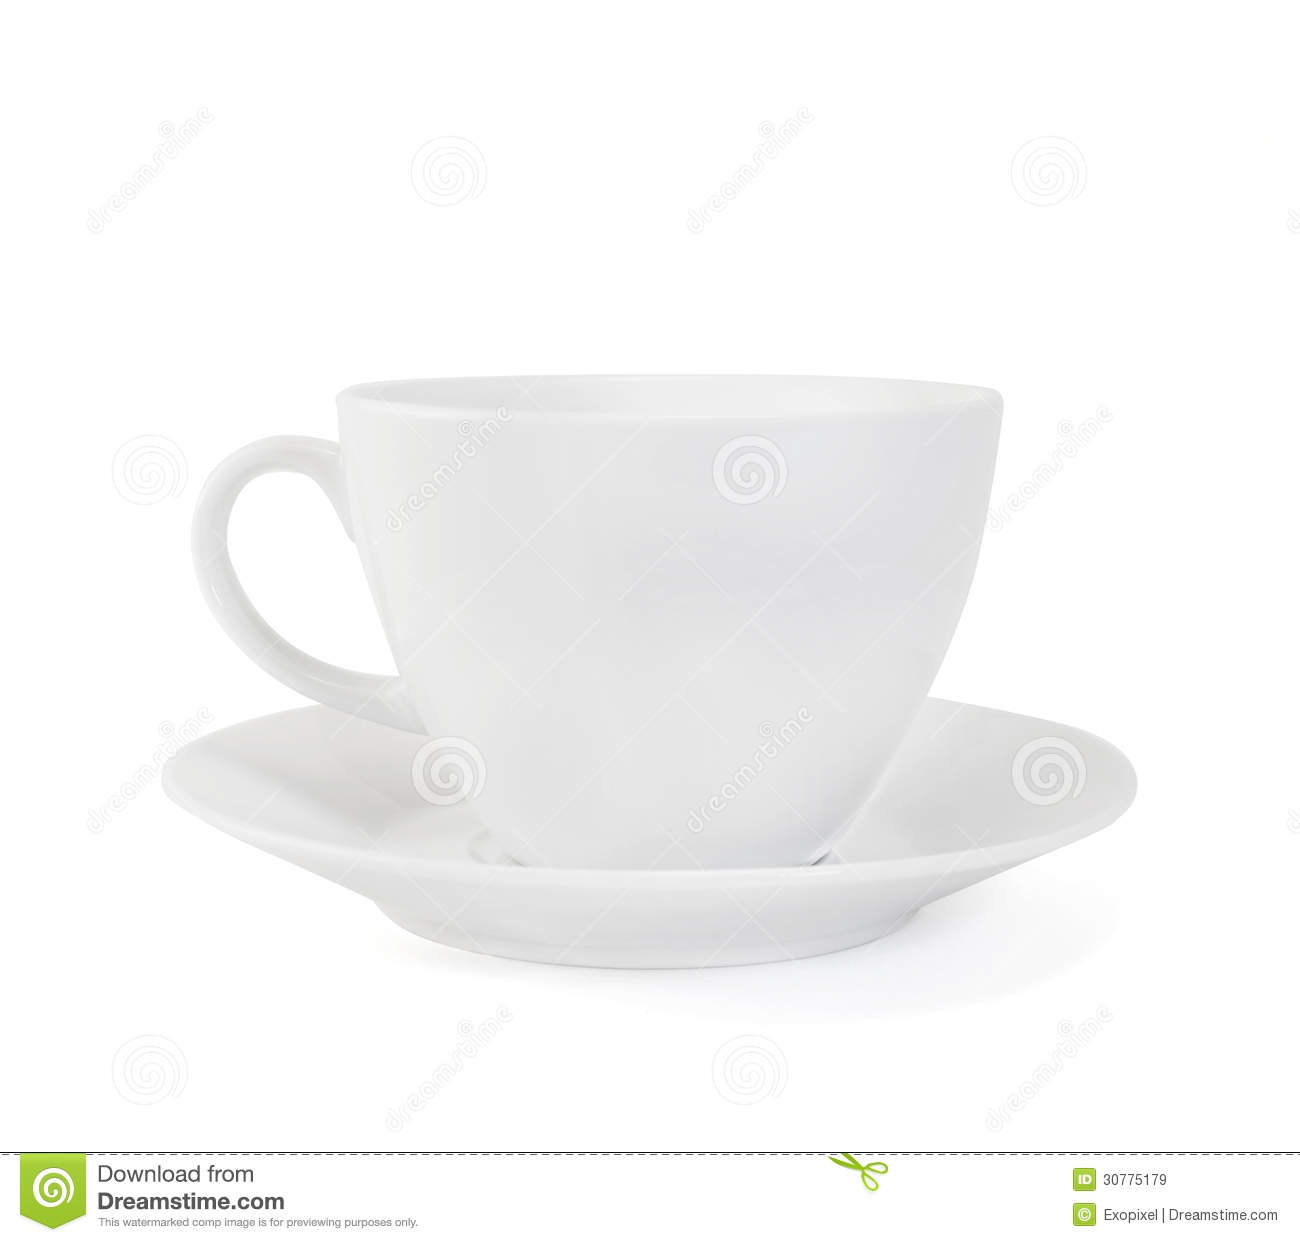 Empty Ceramic Tea Cup Over White Plate Isolated On White Background 